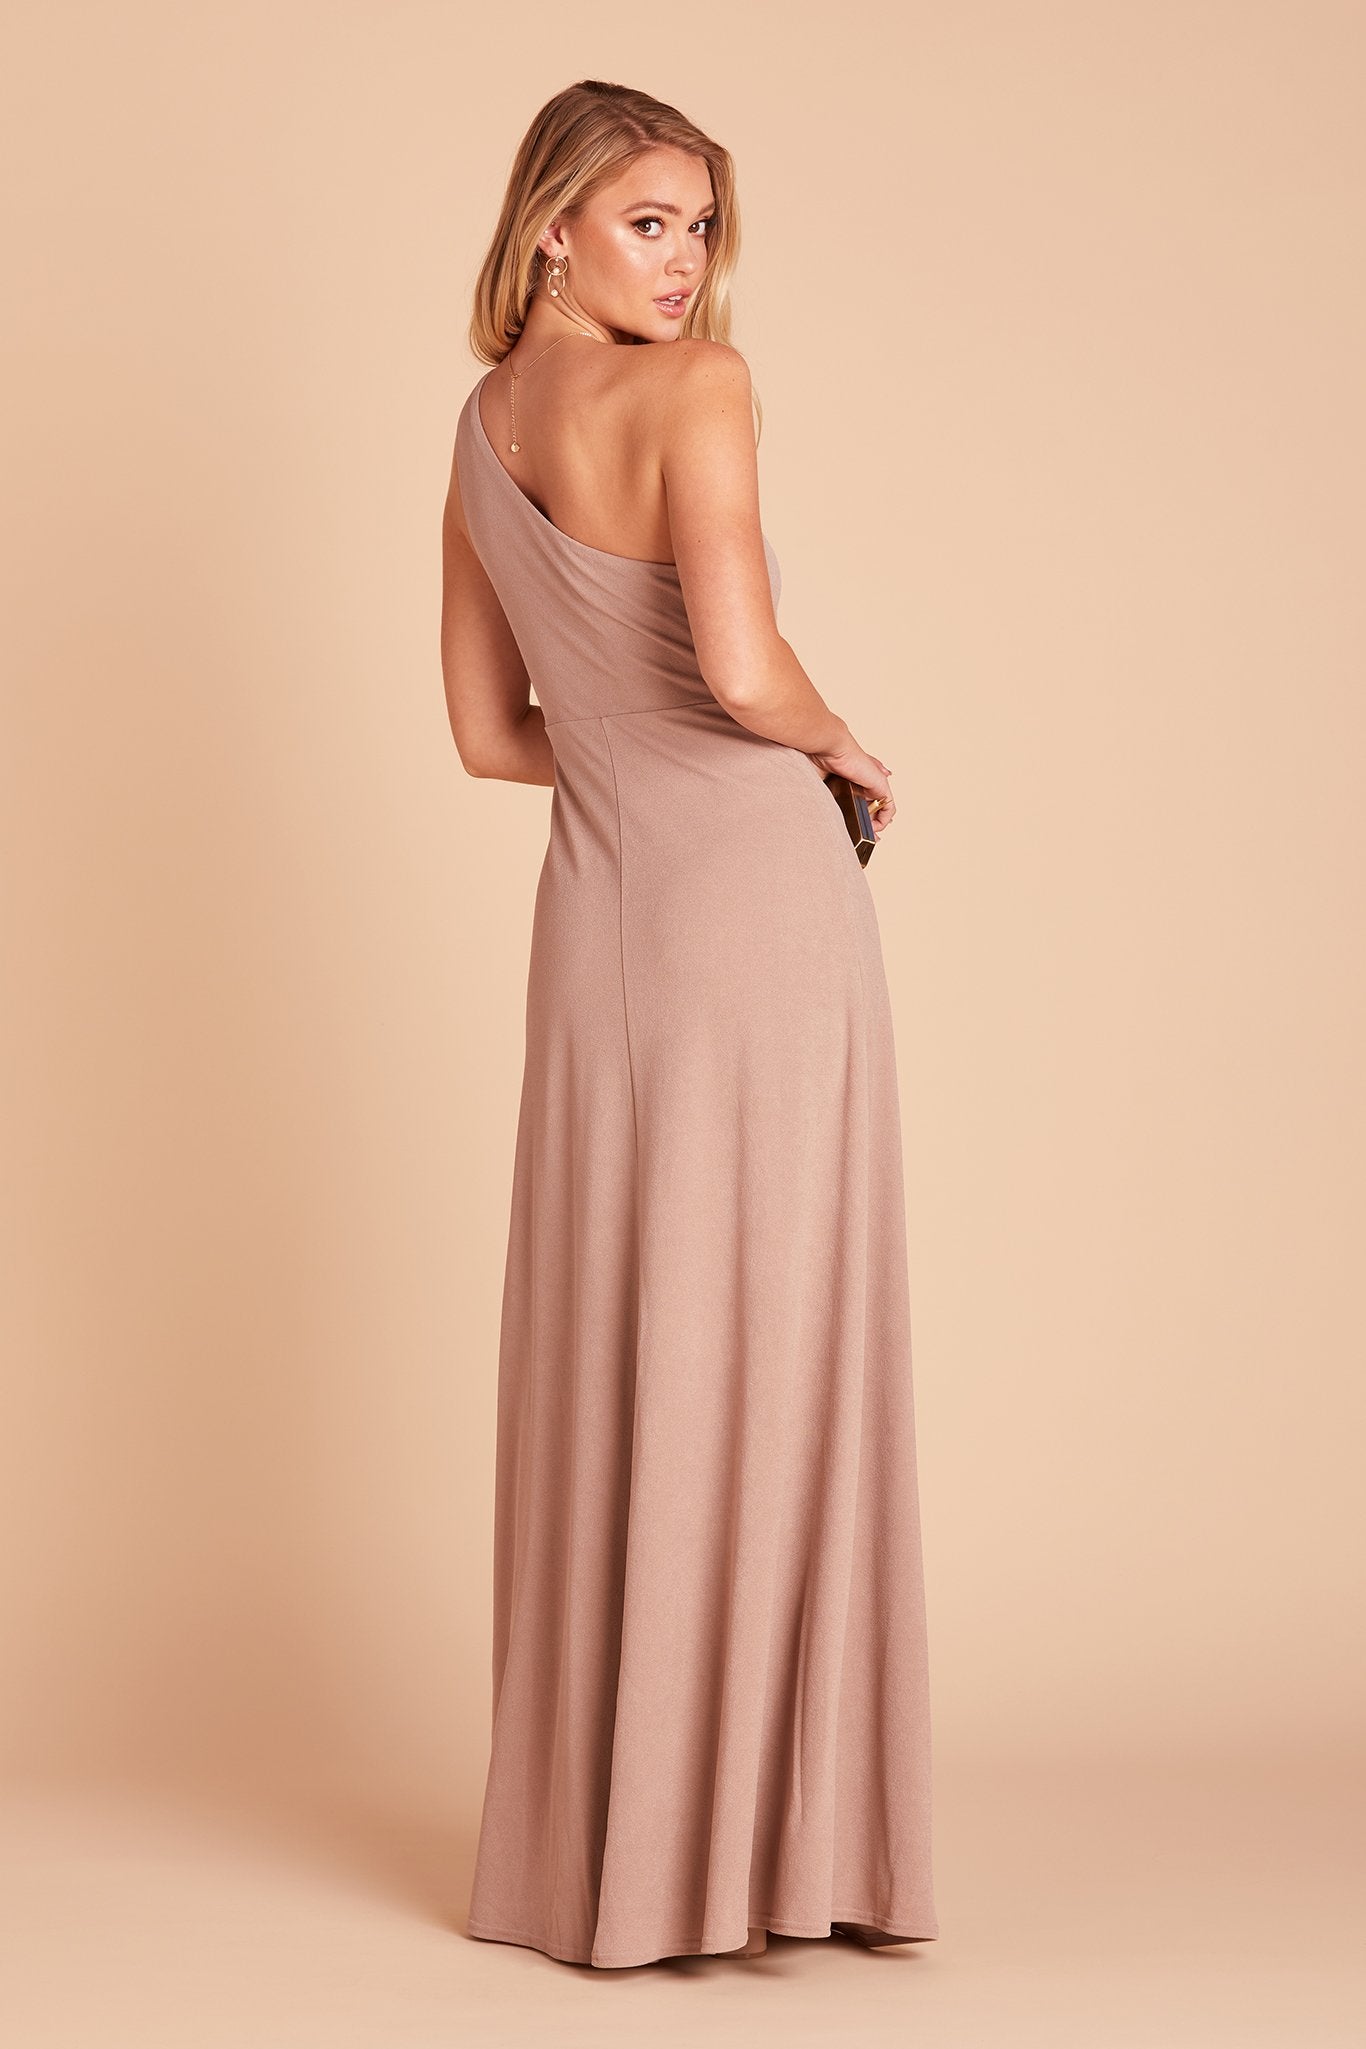 Back and side view of the Kira Dress in taupe crepe shows a slender model with a light skin tone looking backwards over their shoulder demonstrating the drape and fit of the off-the-shoulder bodice and flowing skirt.